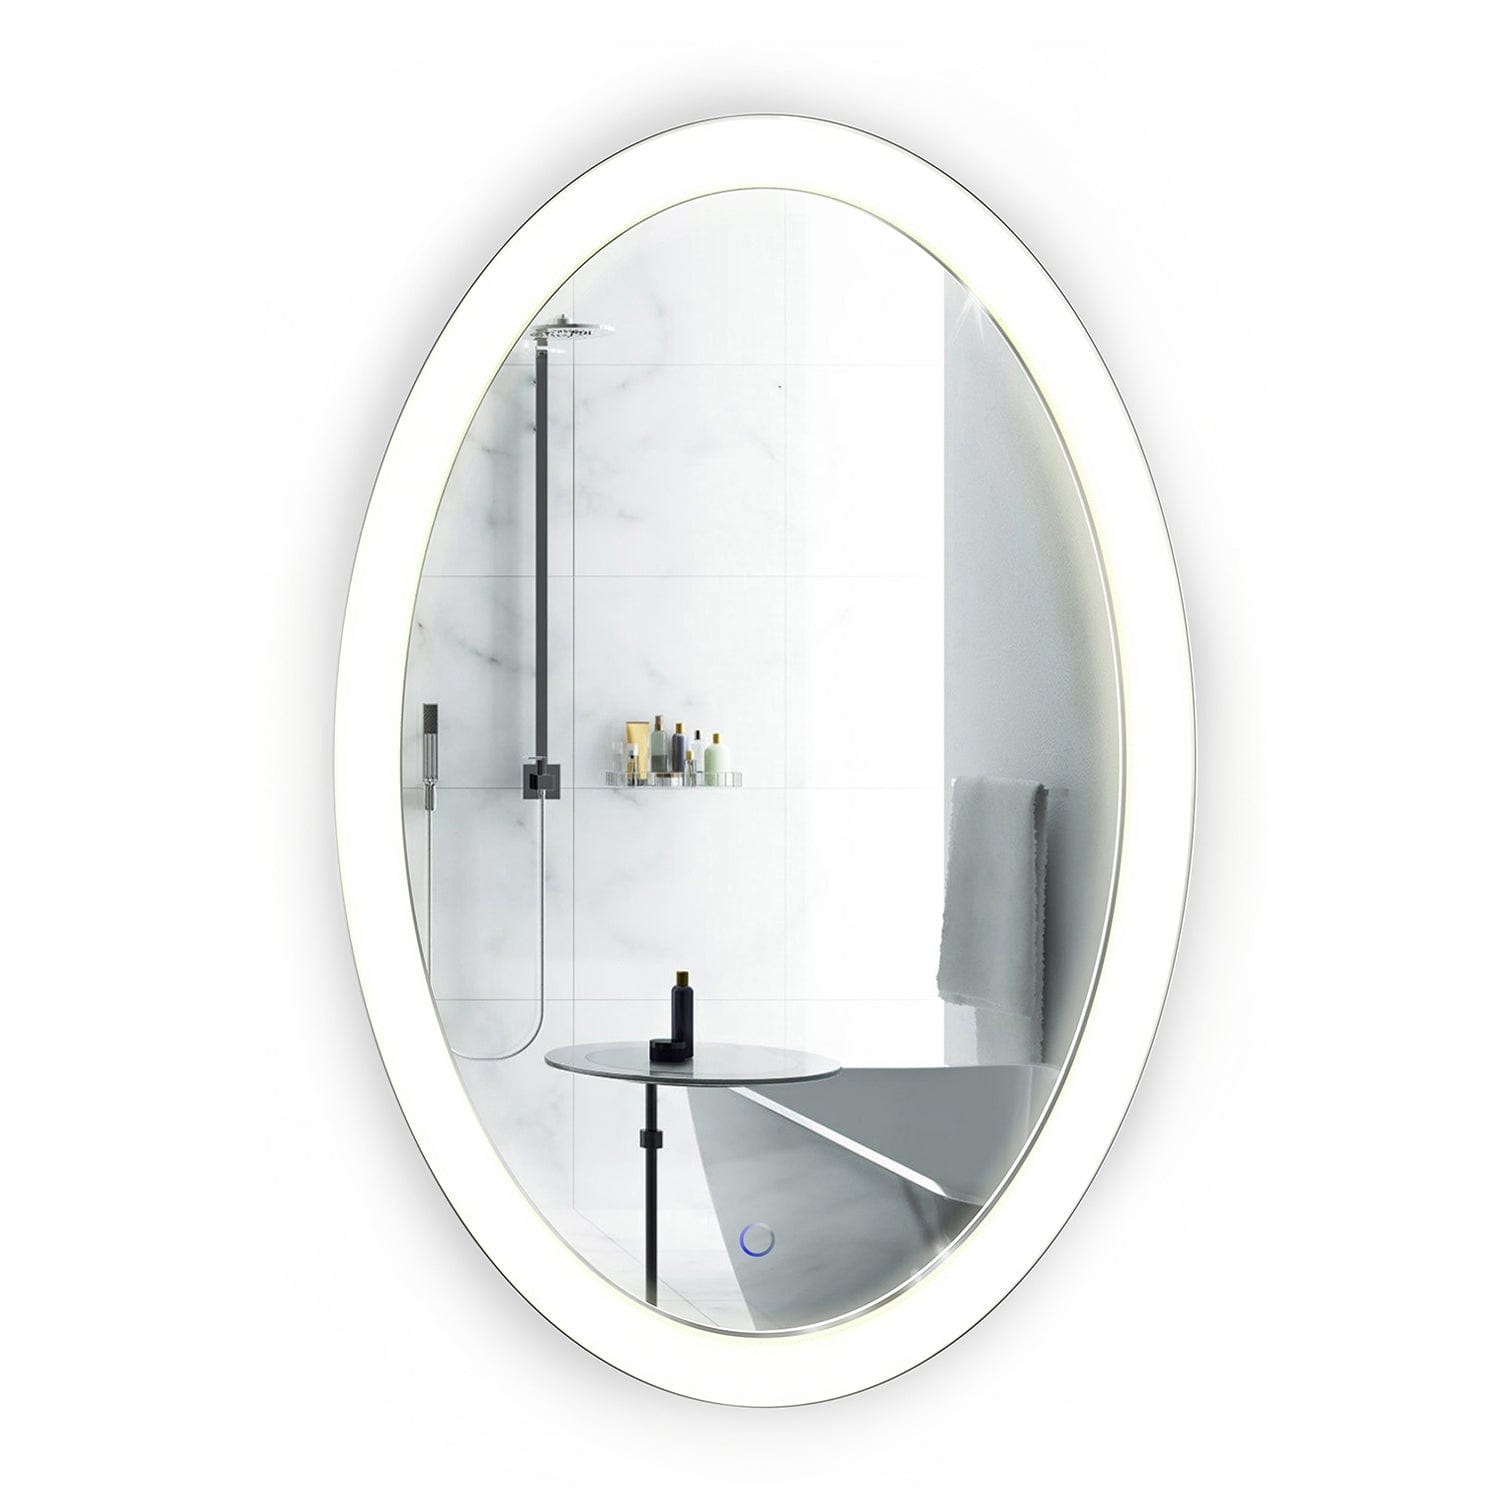 Sol Oval 20" x 30" LED Bathroom Mirror w/ Dimmer & Defogger | Oval Back-lit Vanity Mirror - Molaix - Molaix853962007071Lighted Wall Mirror,OvalSOL2030O